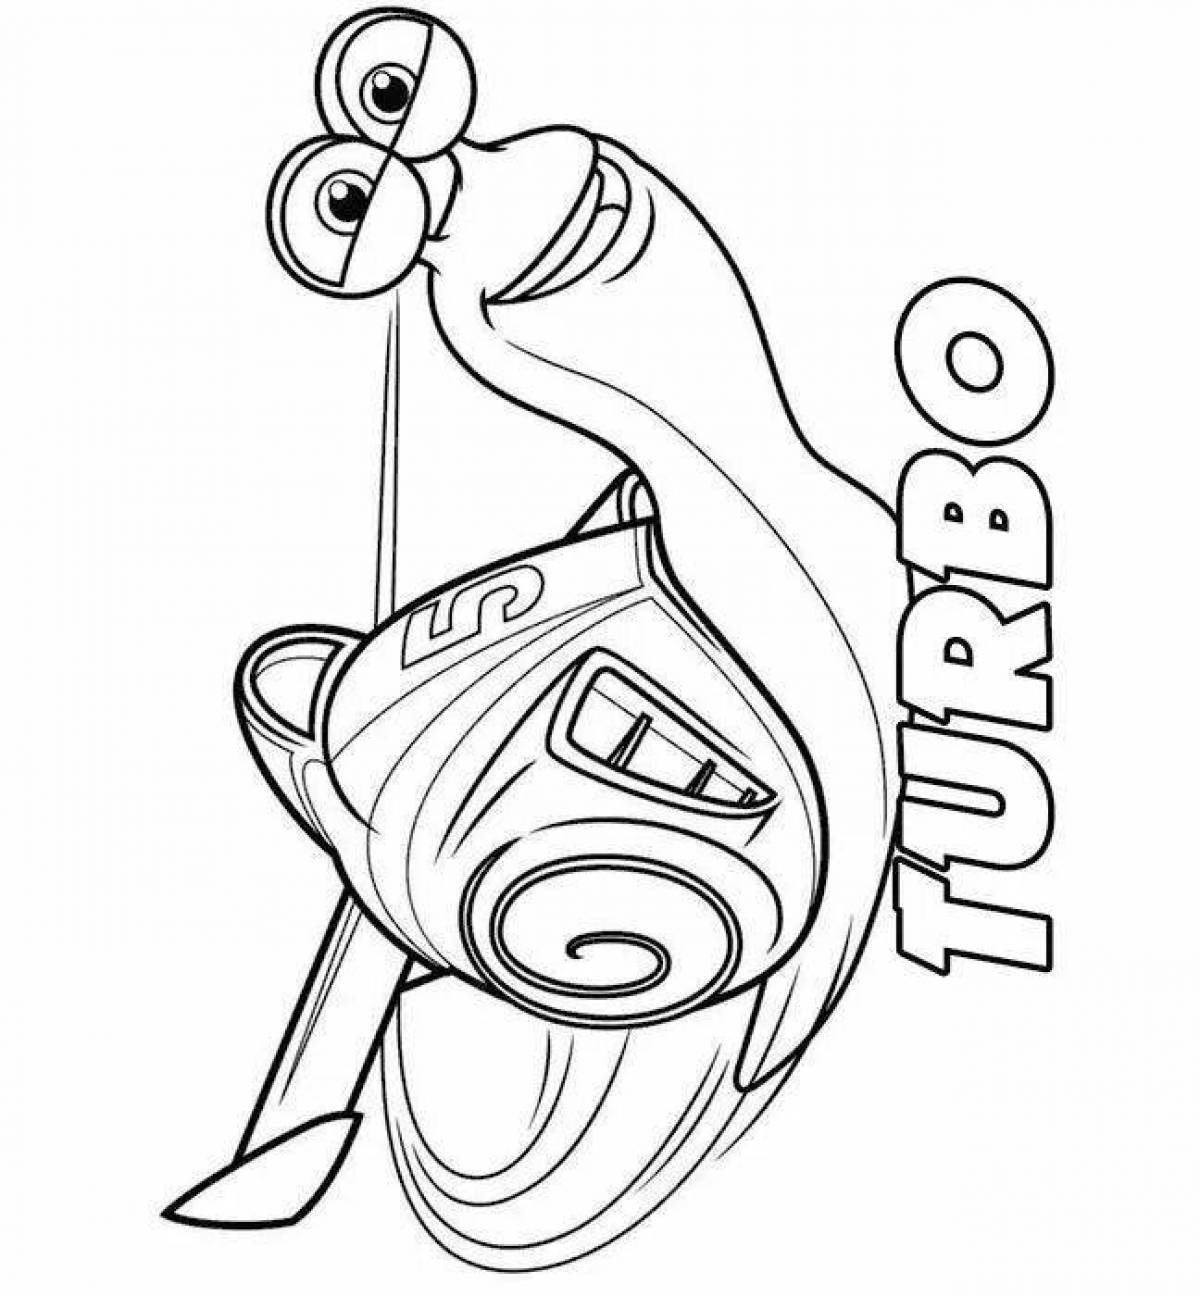 Fascinating coloring turbo snail